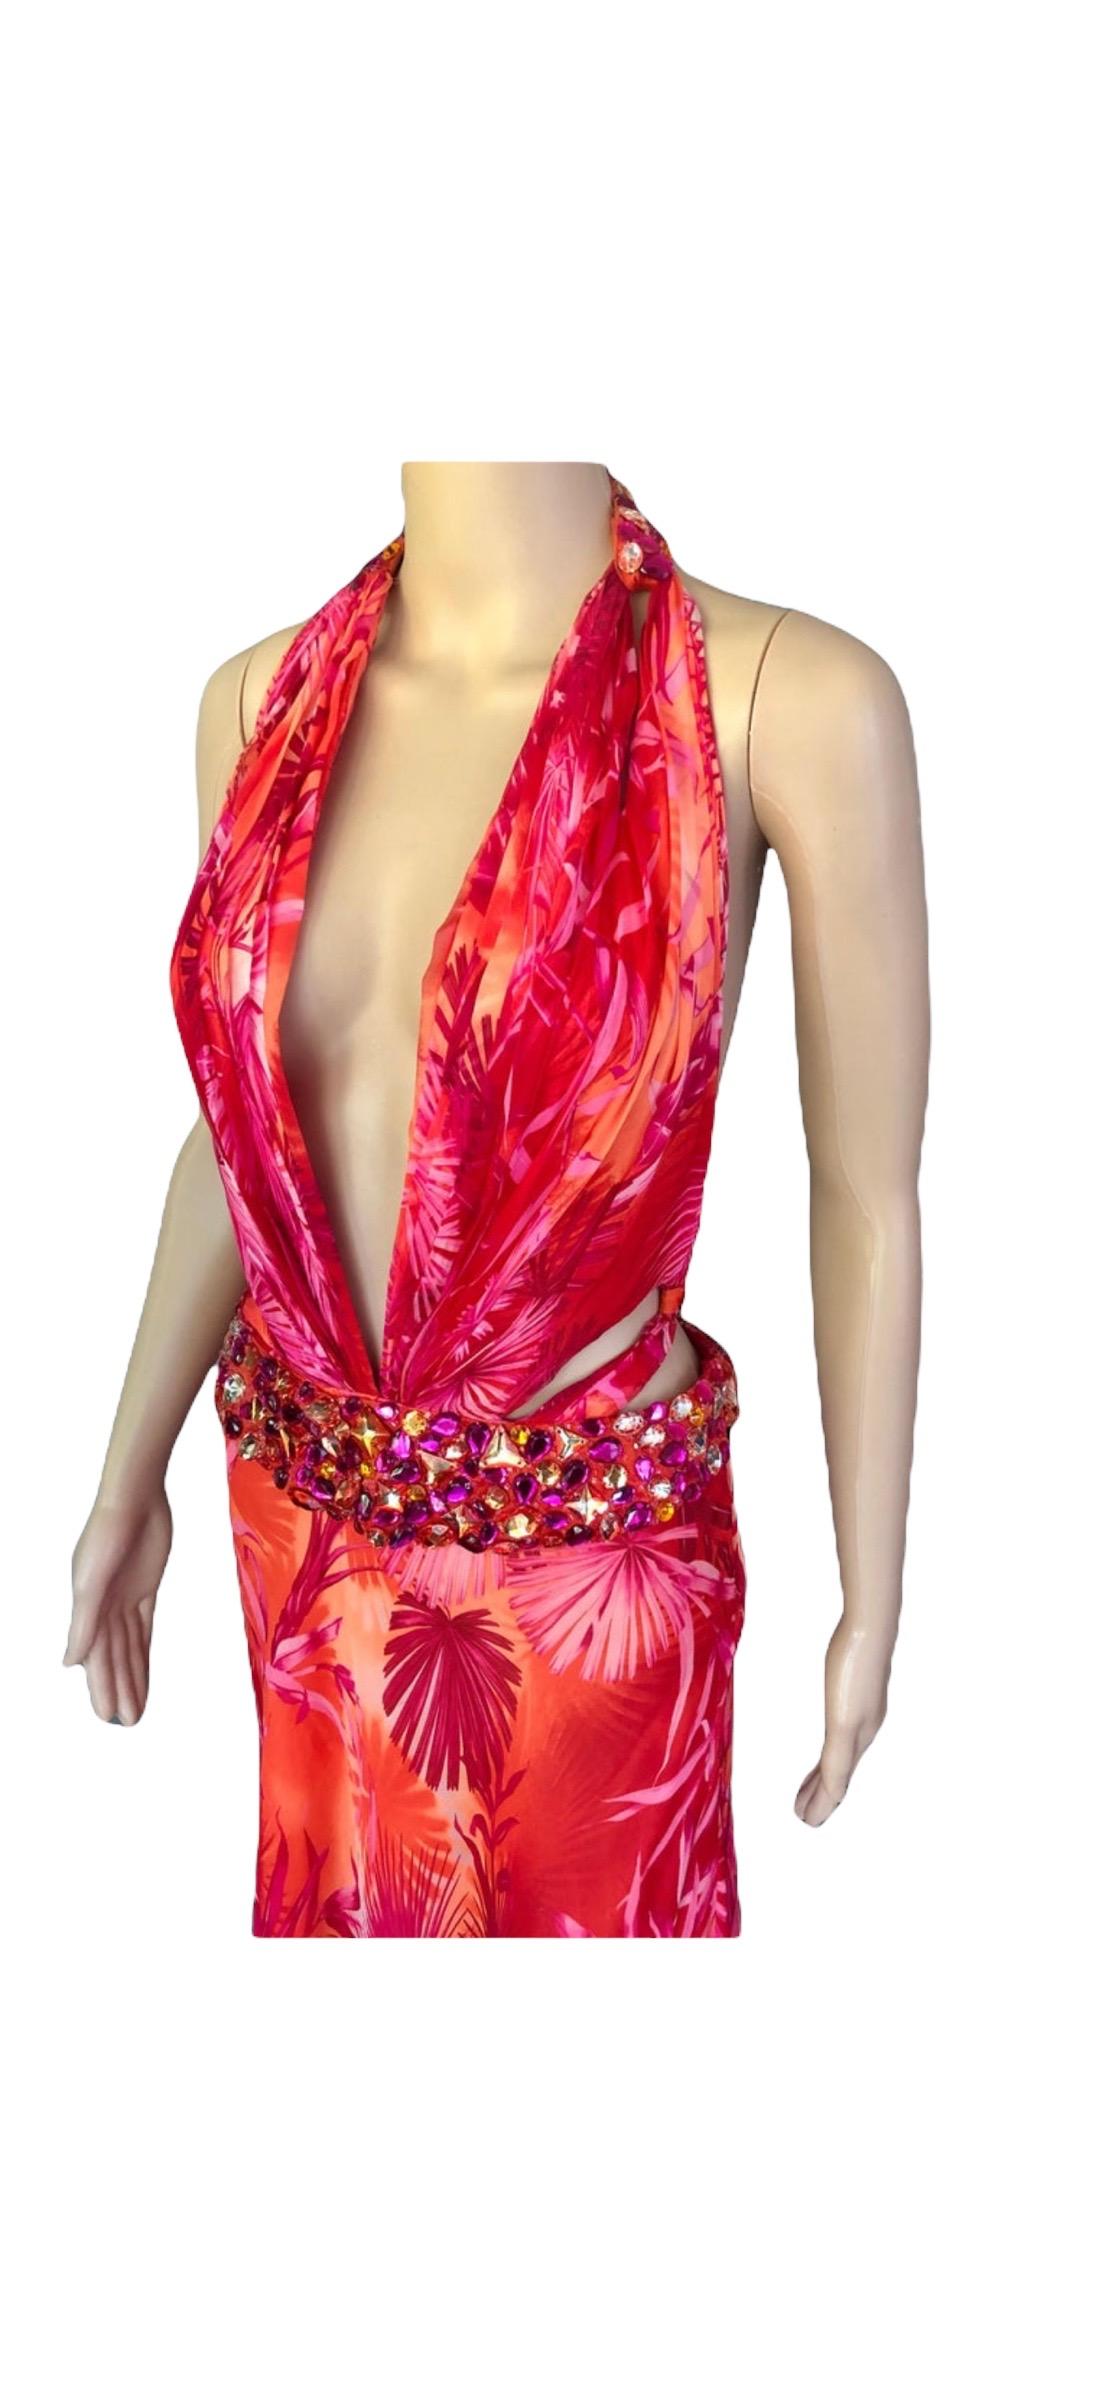 Gianni Versace S/S 2000 Runway Embellished Jungle Print Evening Dress Gown For Sale 2